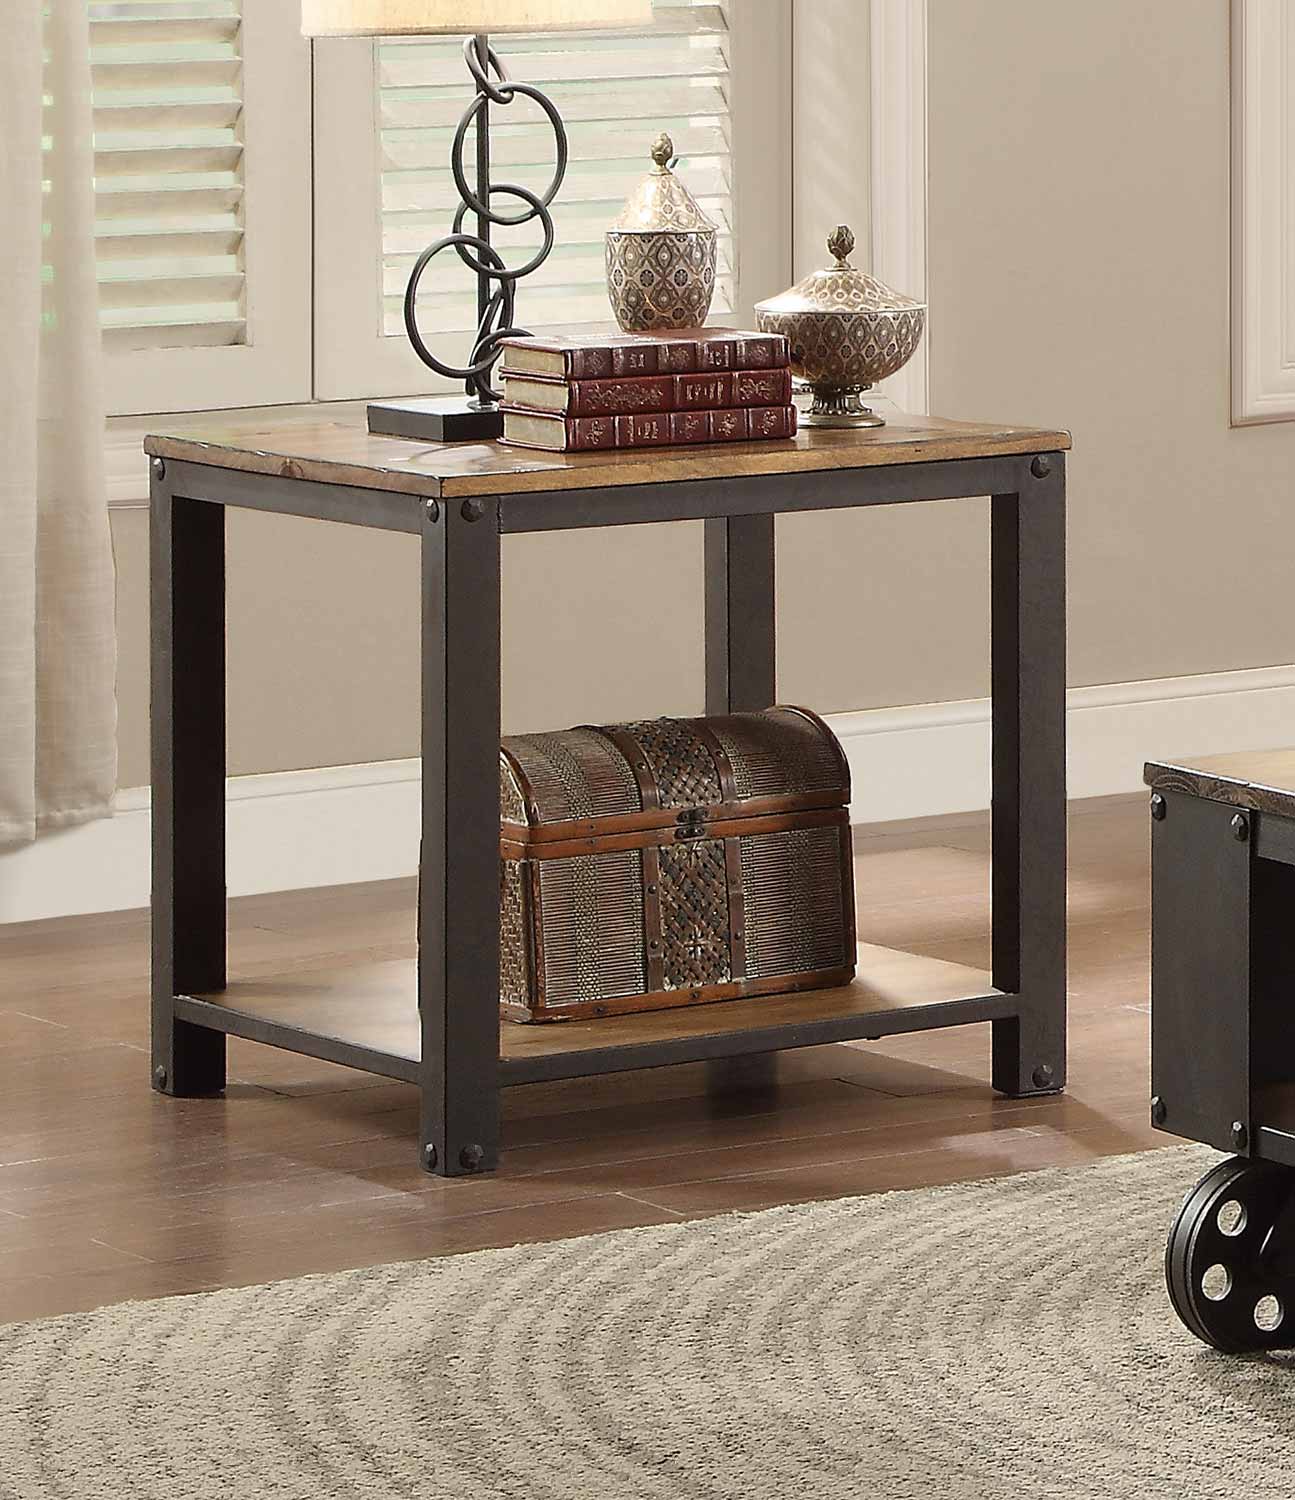 Homelegance Leandra End Table - Wood Table Top with Metal Framing